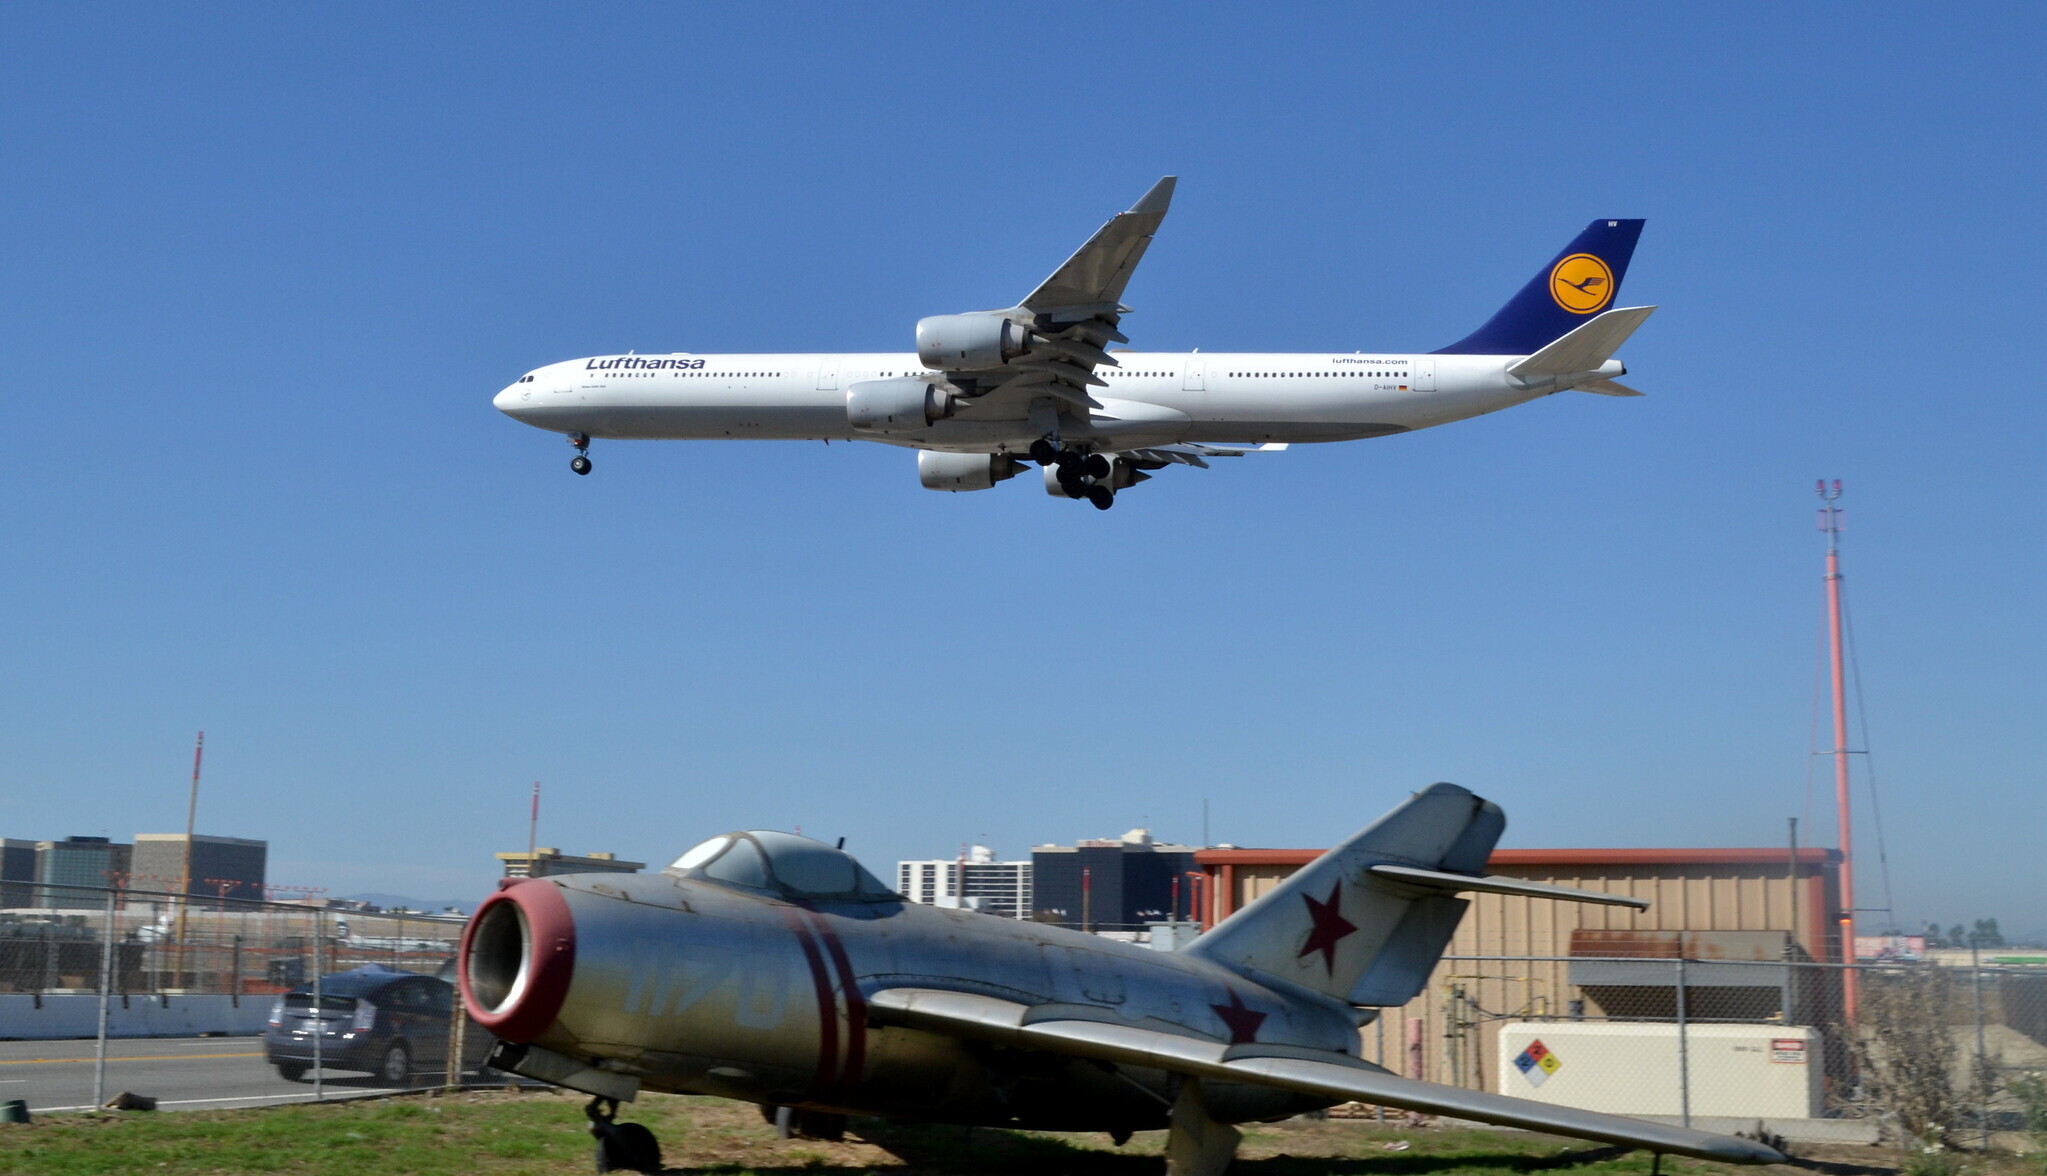 Lufthansa A340 landing at LAX with some aviation history on the ground by Tracie Hall via Flickr/CC BY-SA 2.0